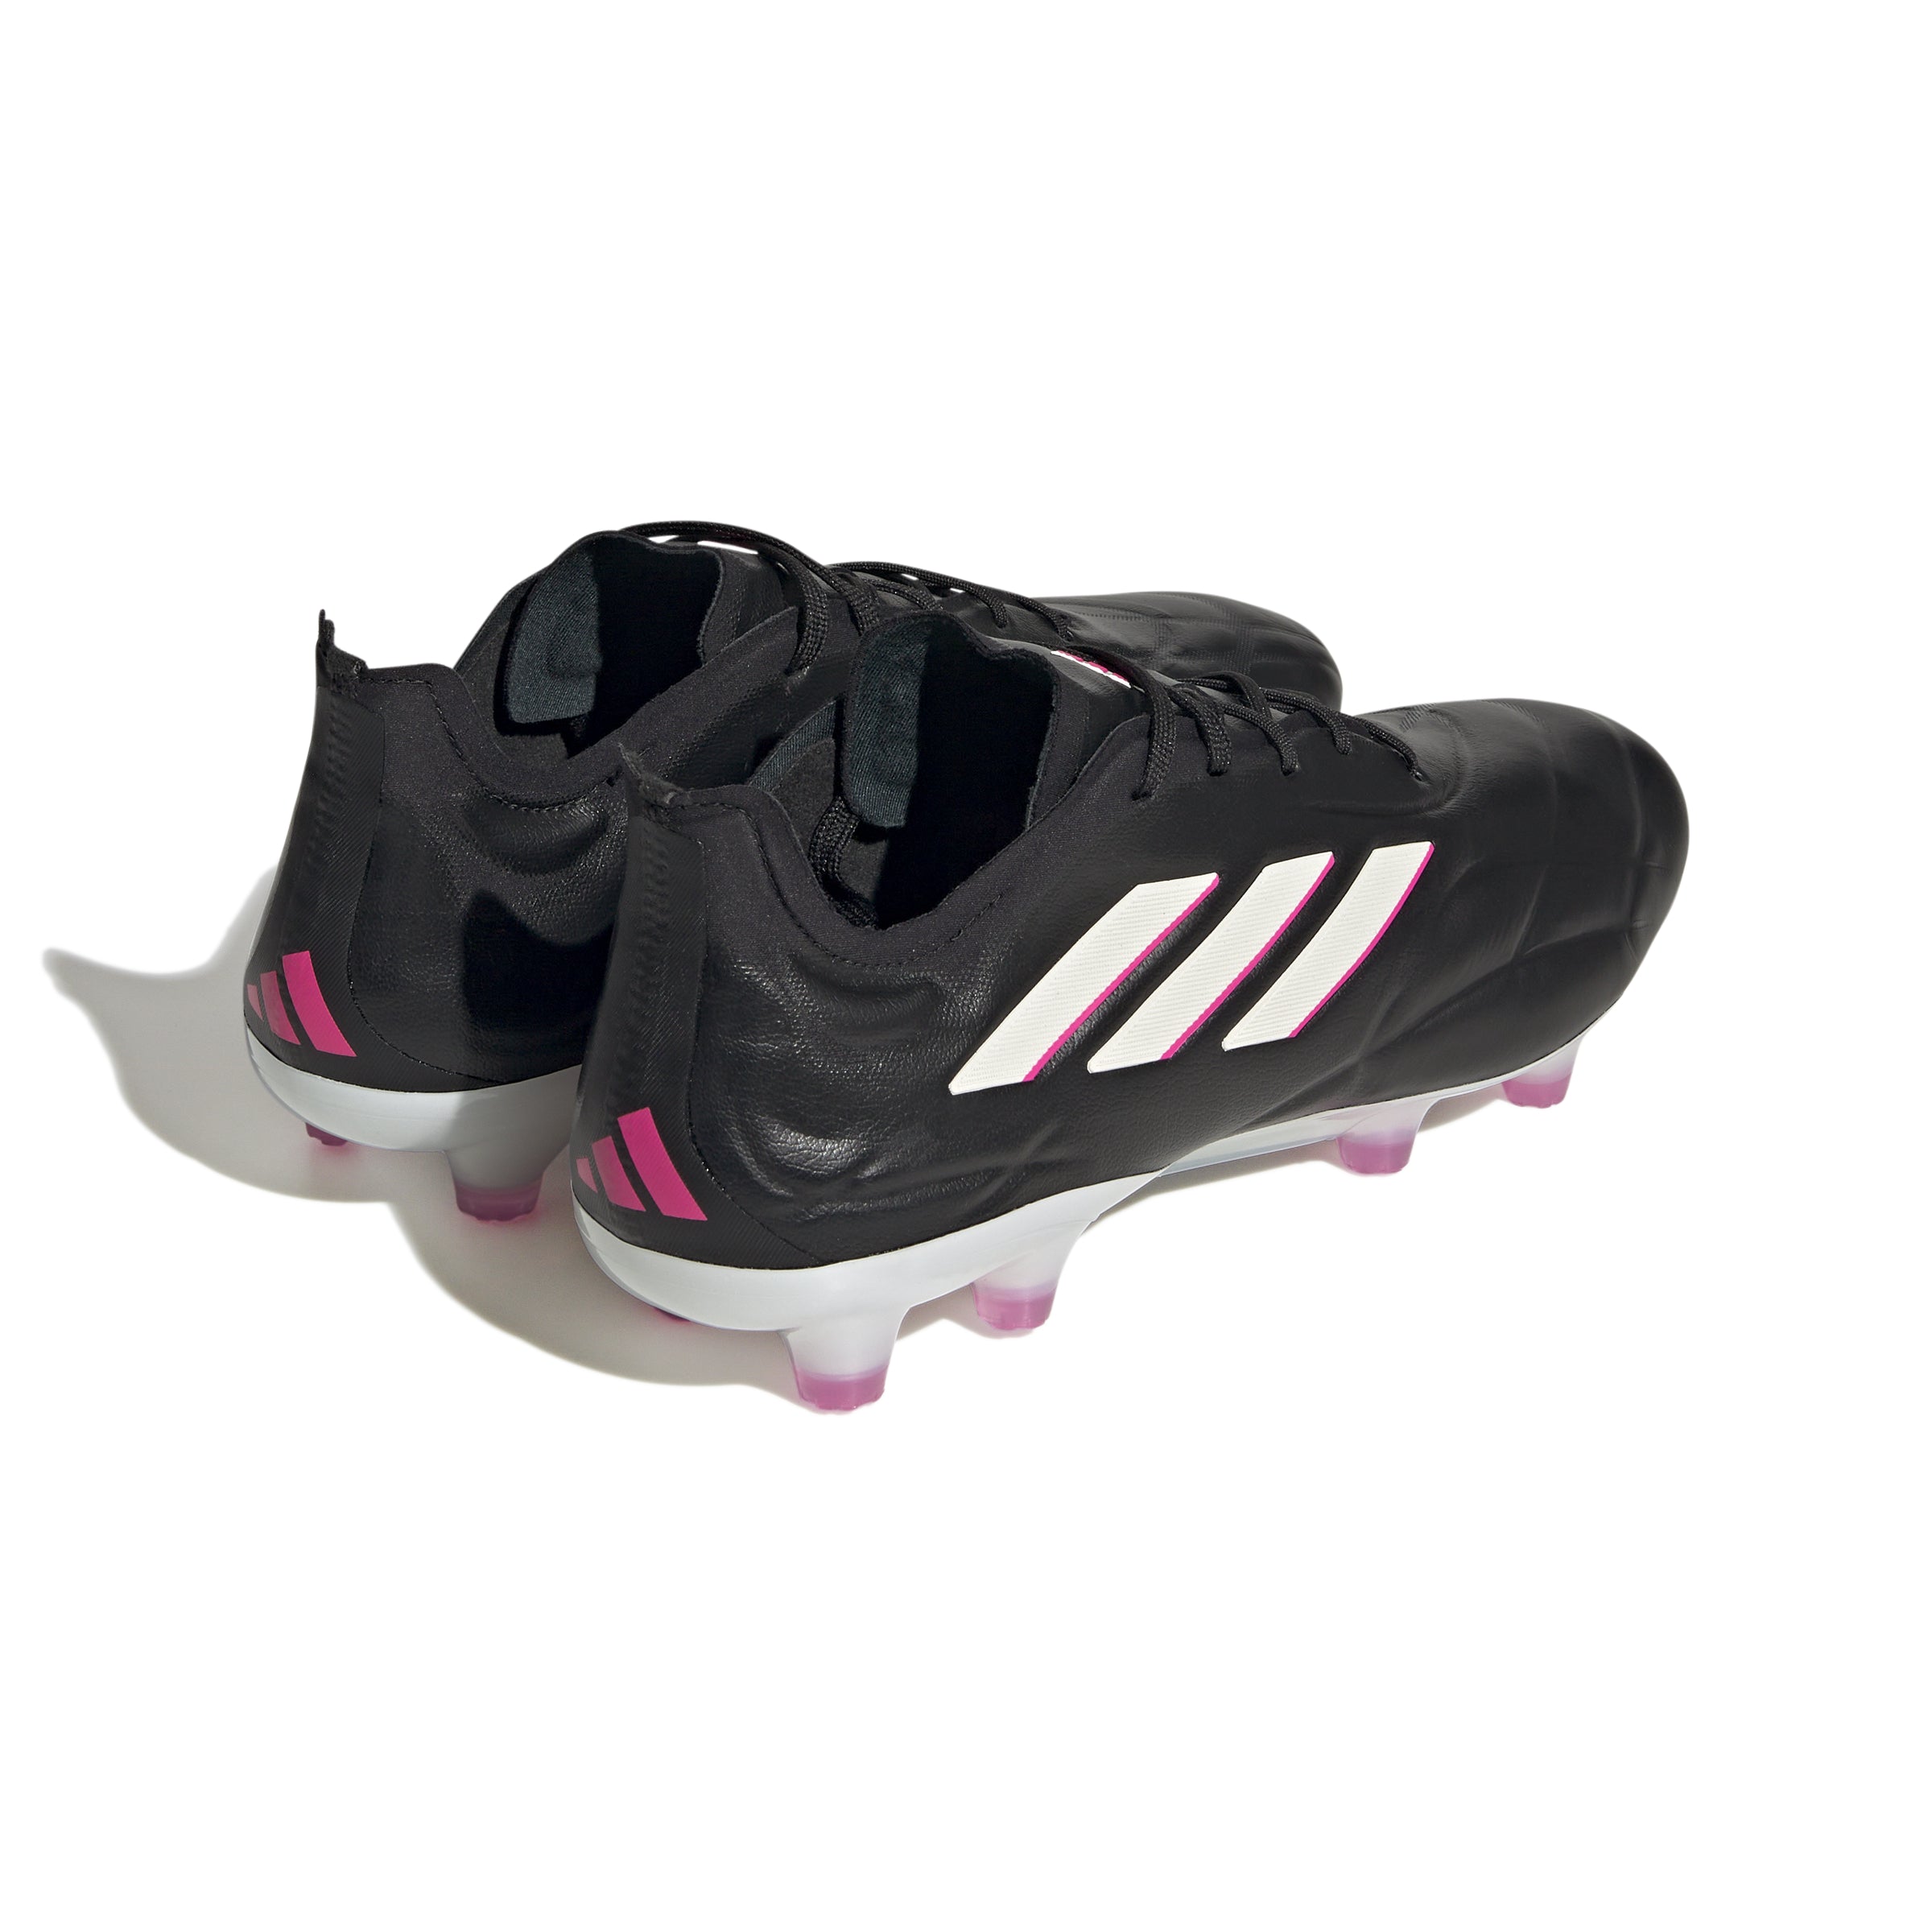 adidas Copa Pure. 1 FG Firm Ground Soccer Cleats